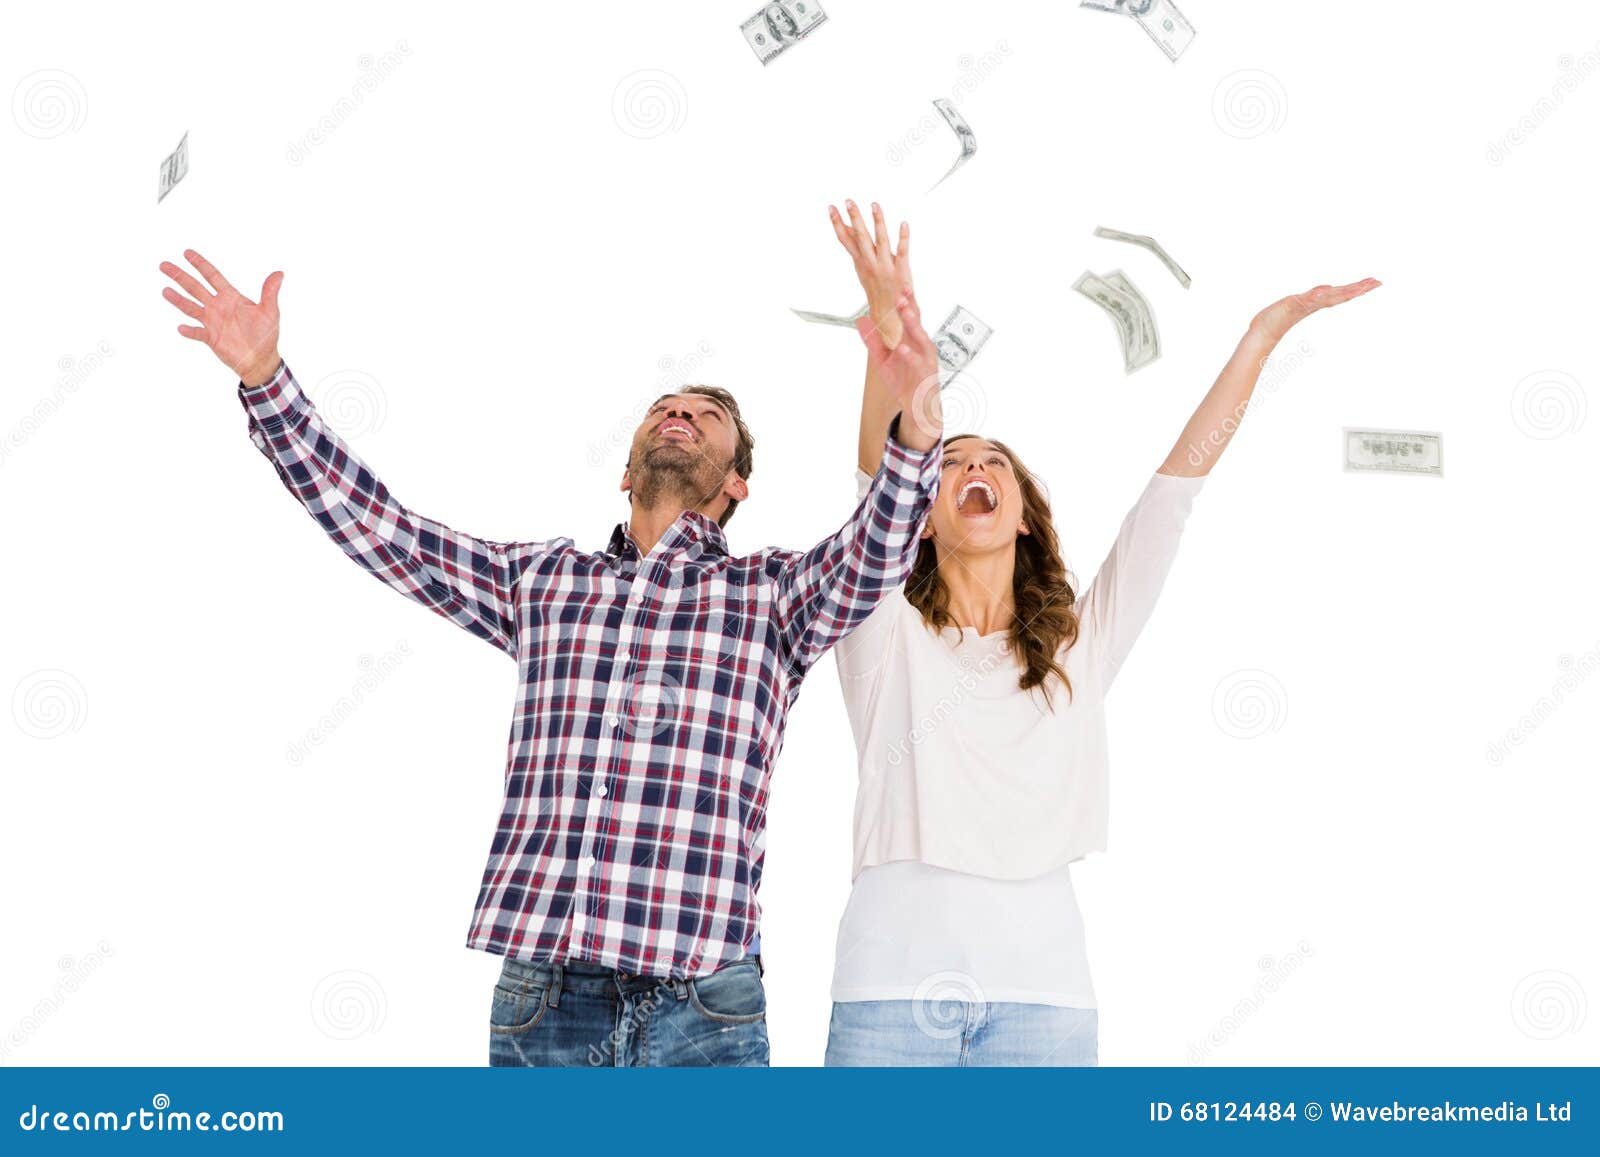 happy young couple throwing currency notes in air